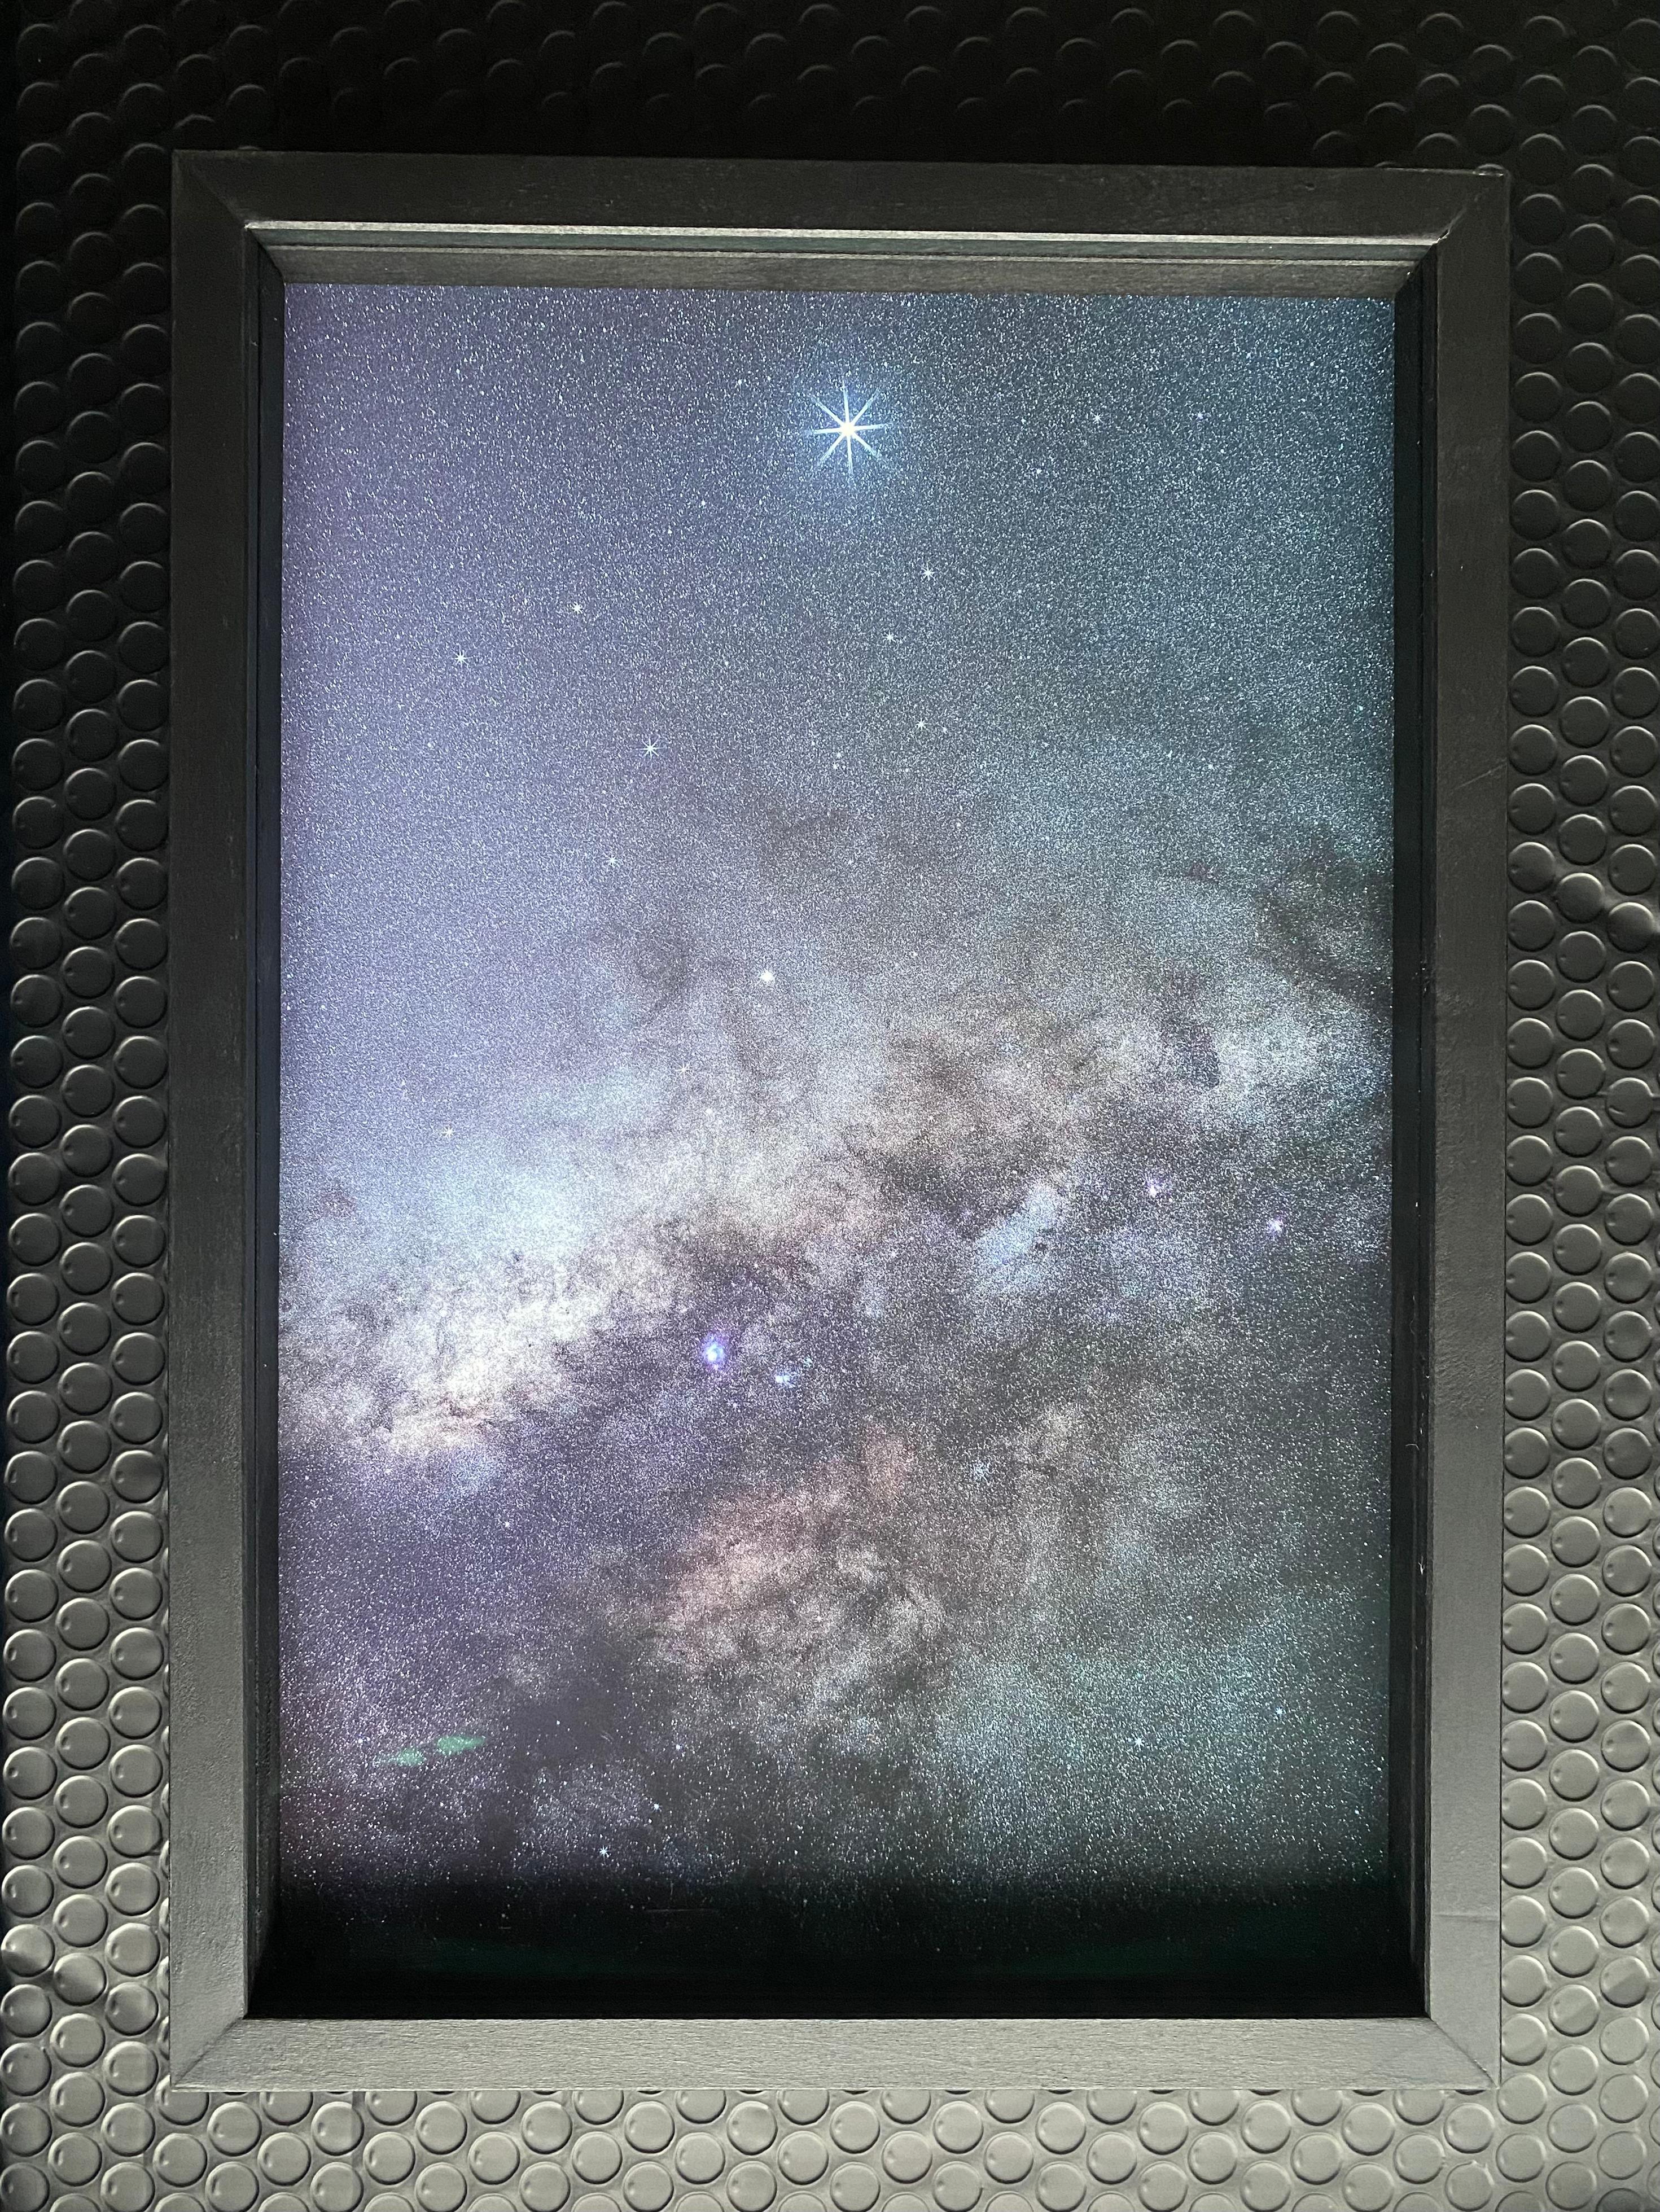 Anna Dobrovolskaya-Mints Color Photograph - Jupiter and Milky Way: Color Night Photo with Black Frame and Museum Glass